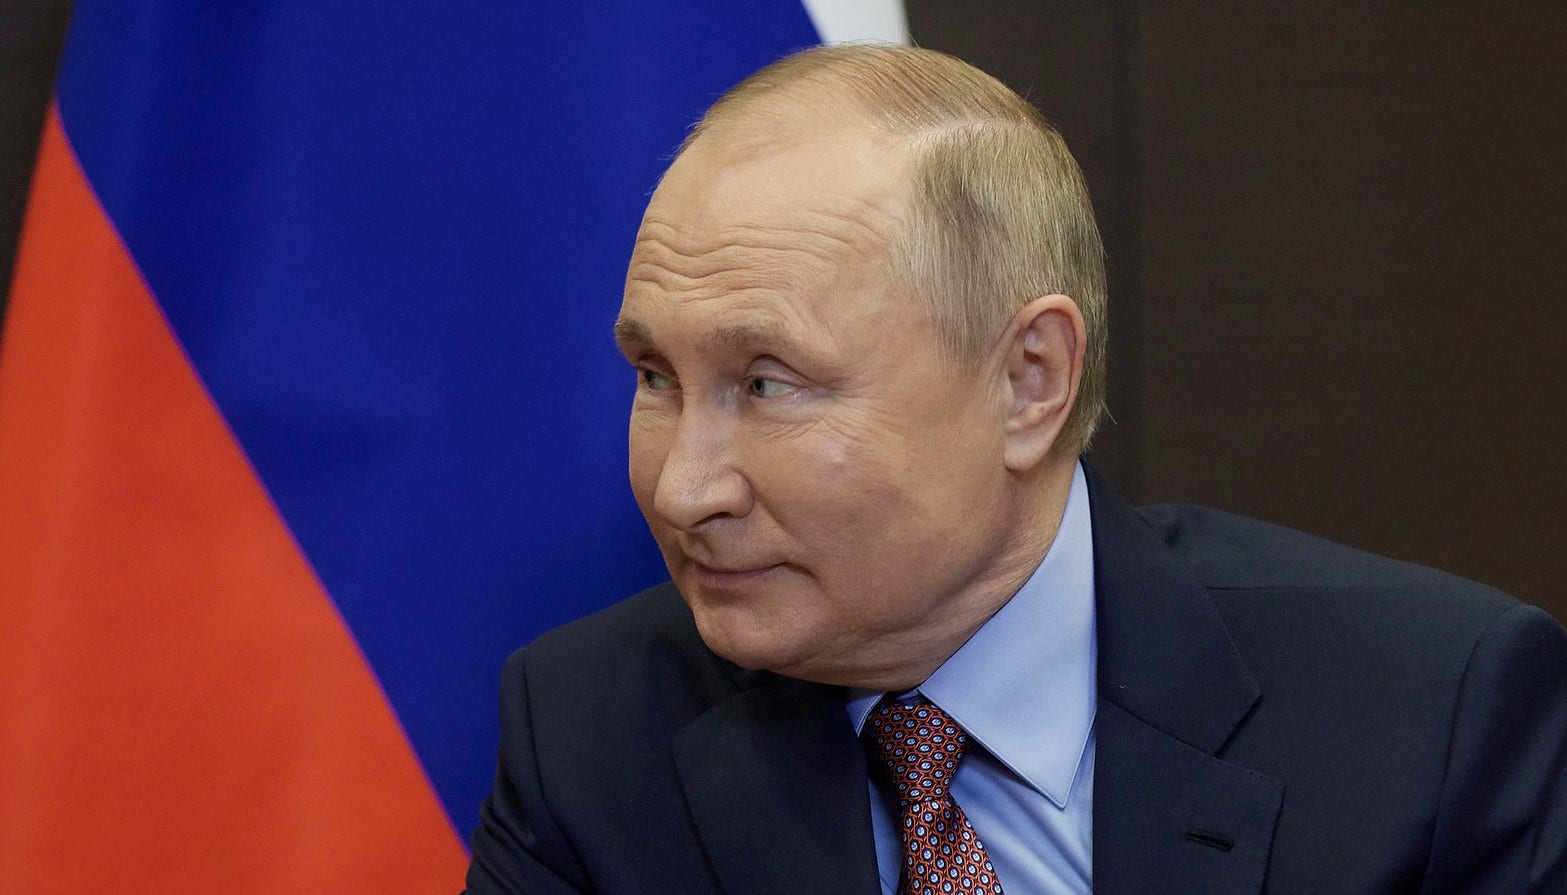 President Putin Suffering From 'Rapidly Progressing Cancer,' On Verge Of Losing Sight: Report